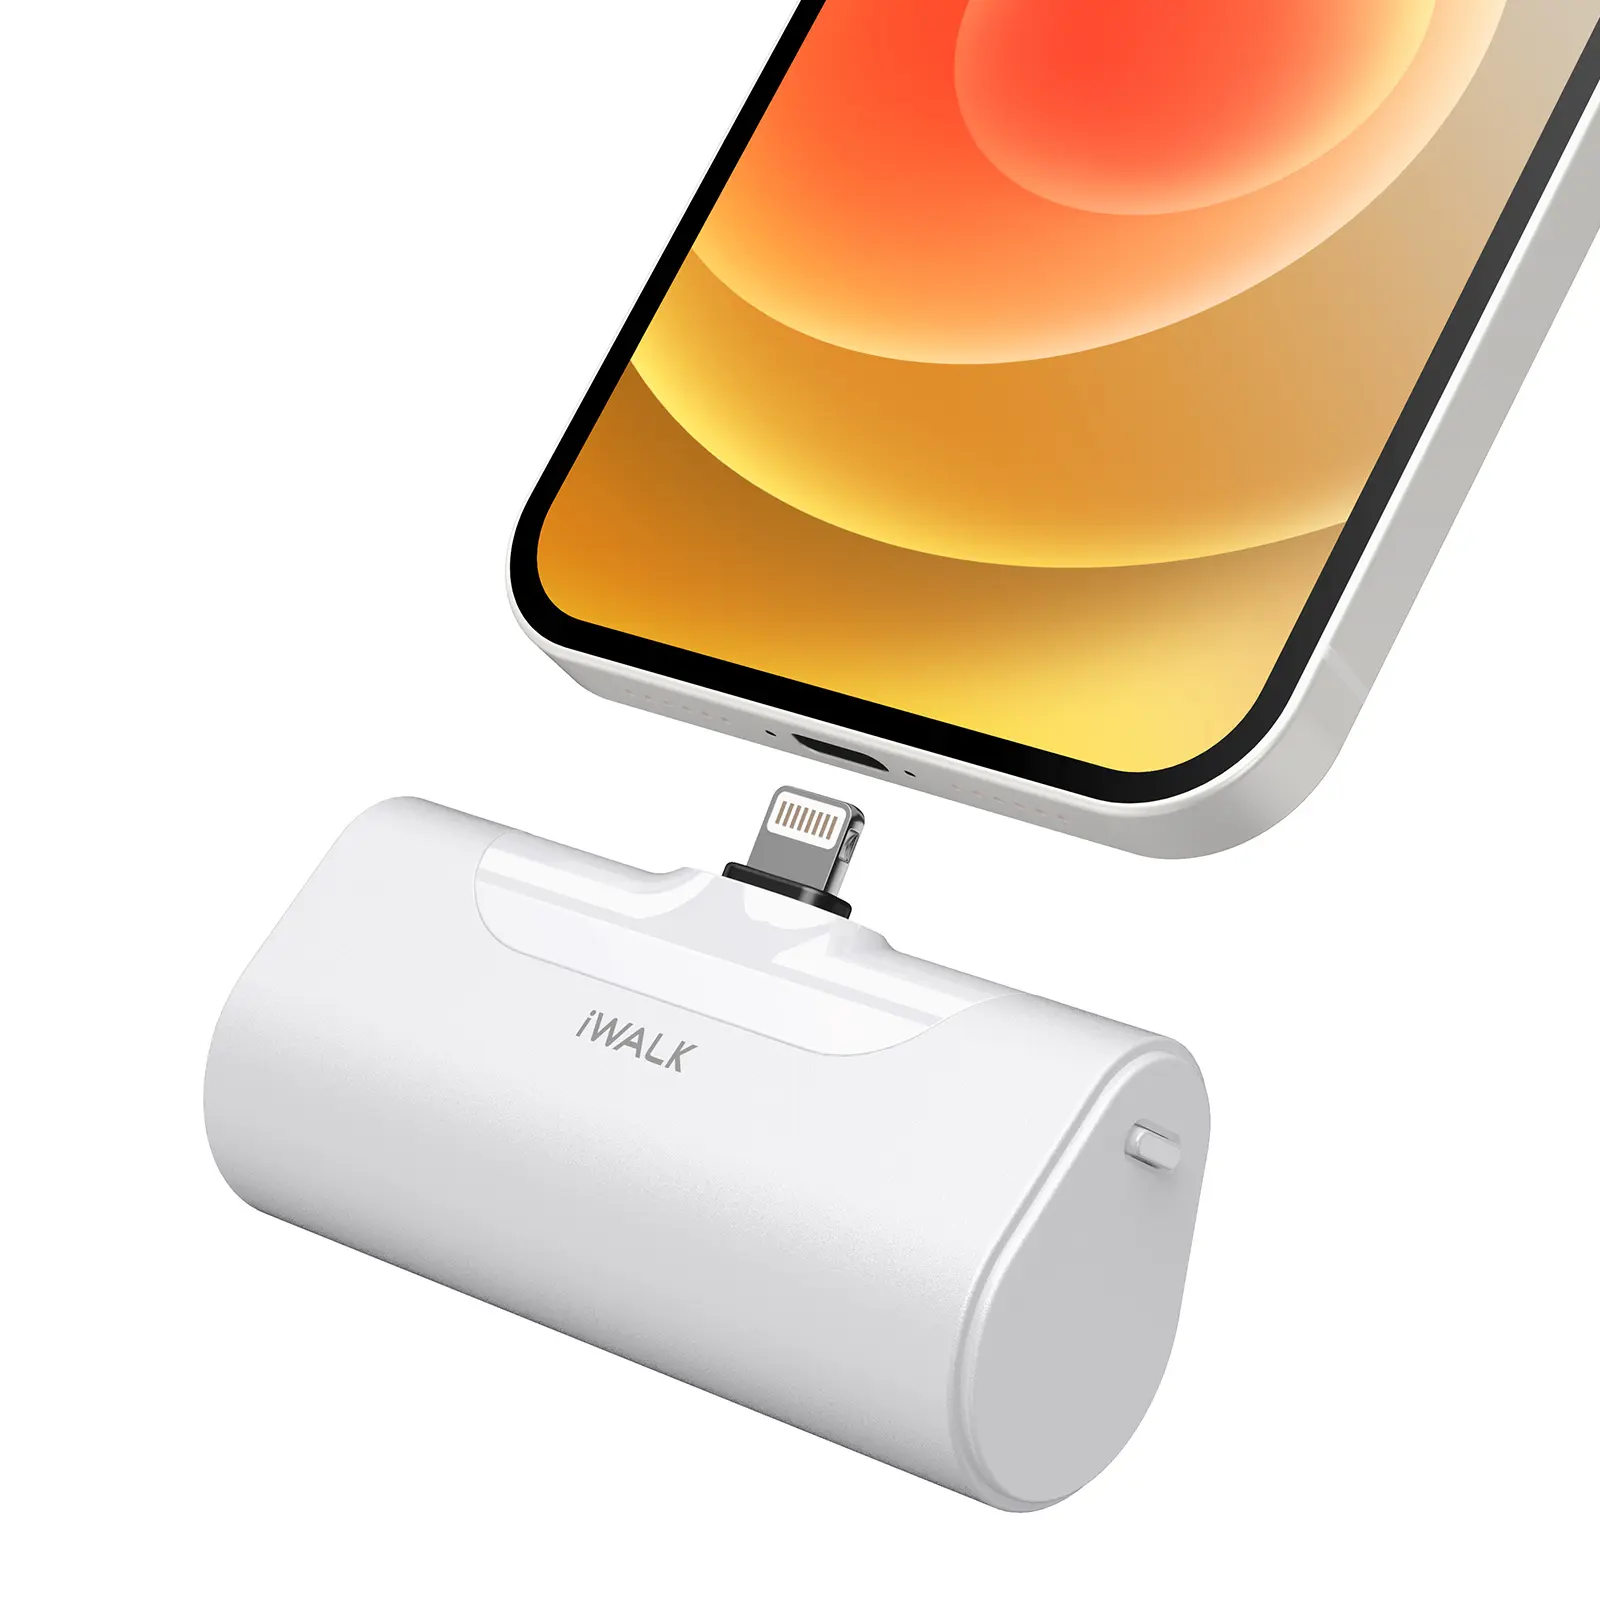 iWALK LinkPod 4 Powerbank Smallest Mini Size Phone Charger Wireless Charger No Need Cable Mini Mobile Power Bank Portable